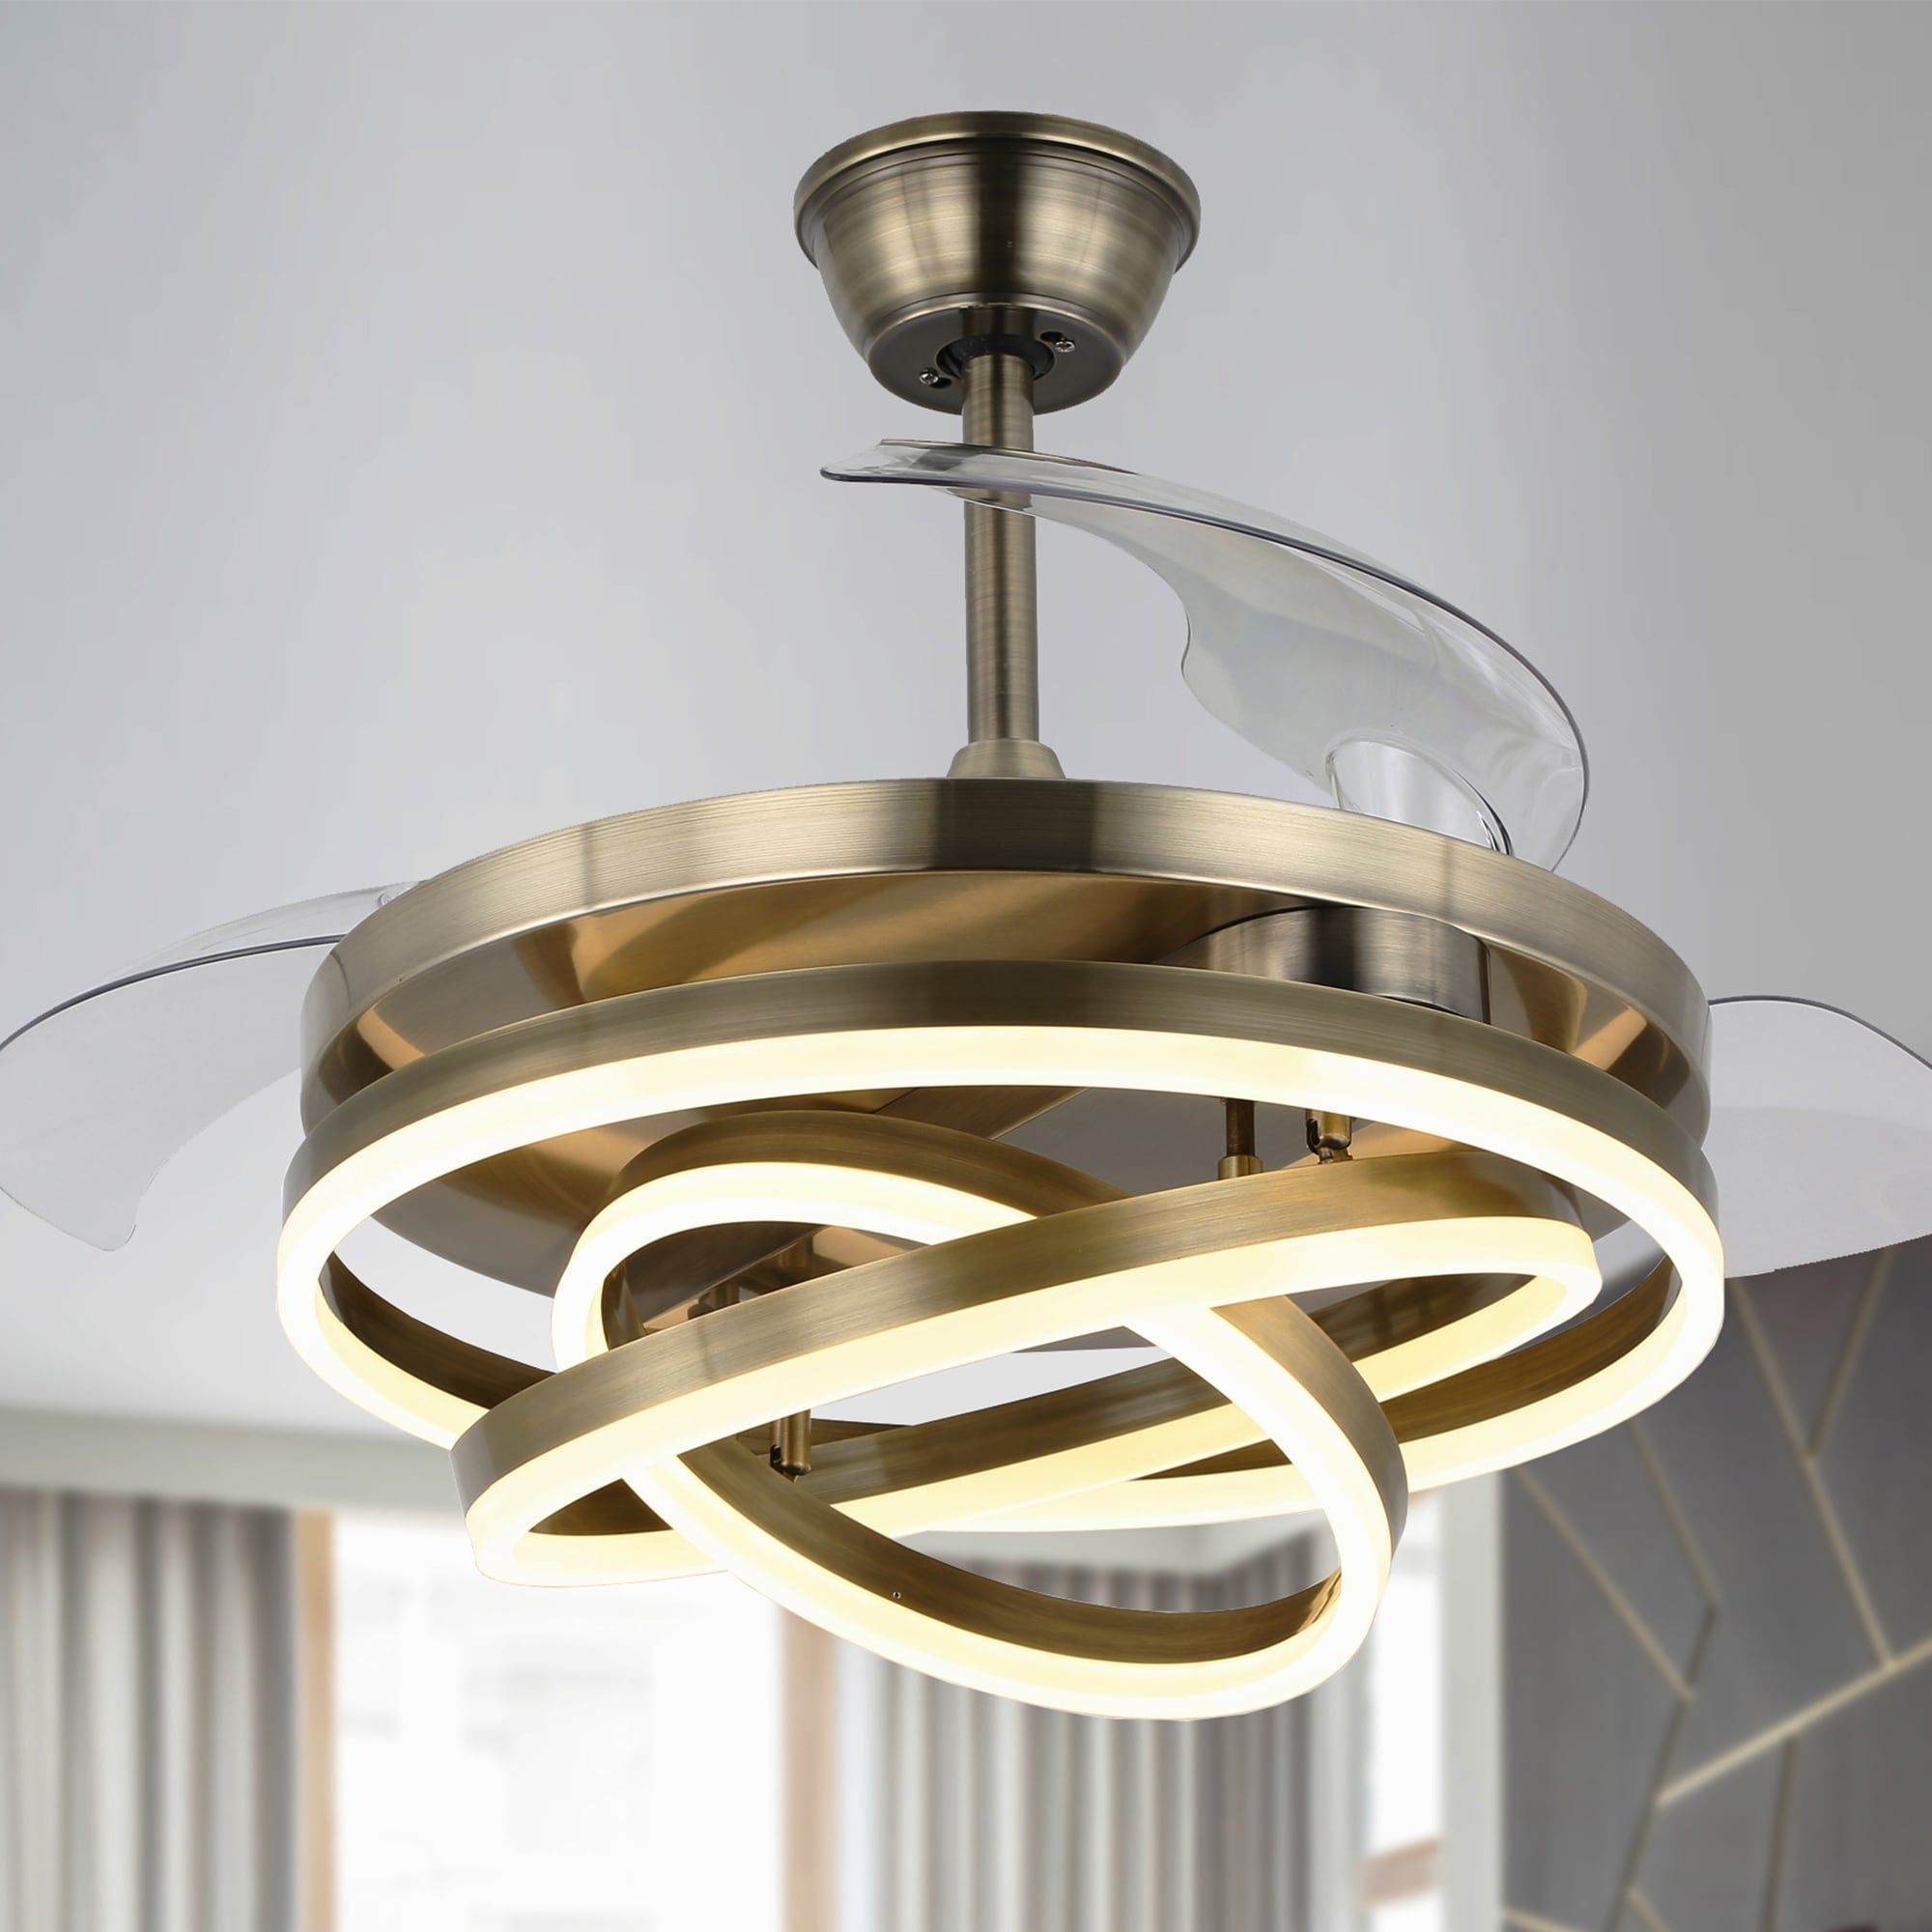 Elevate Your Space with Contemporary Ceiling Fans Featuring Elegant Chandeliers